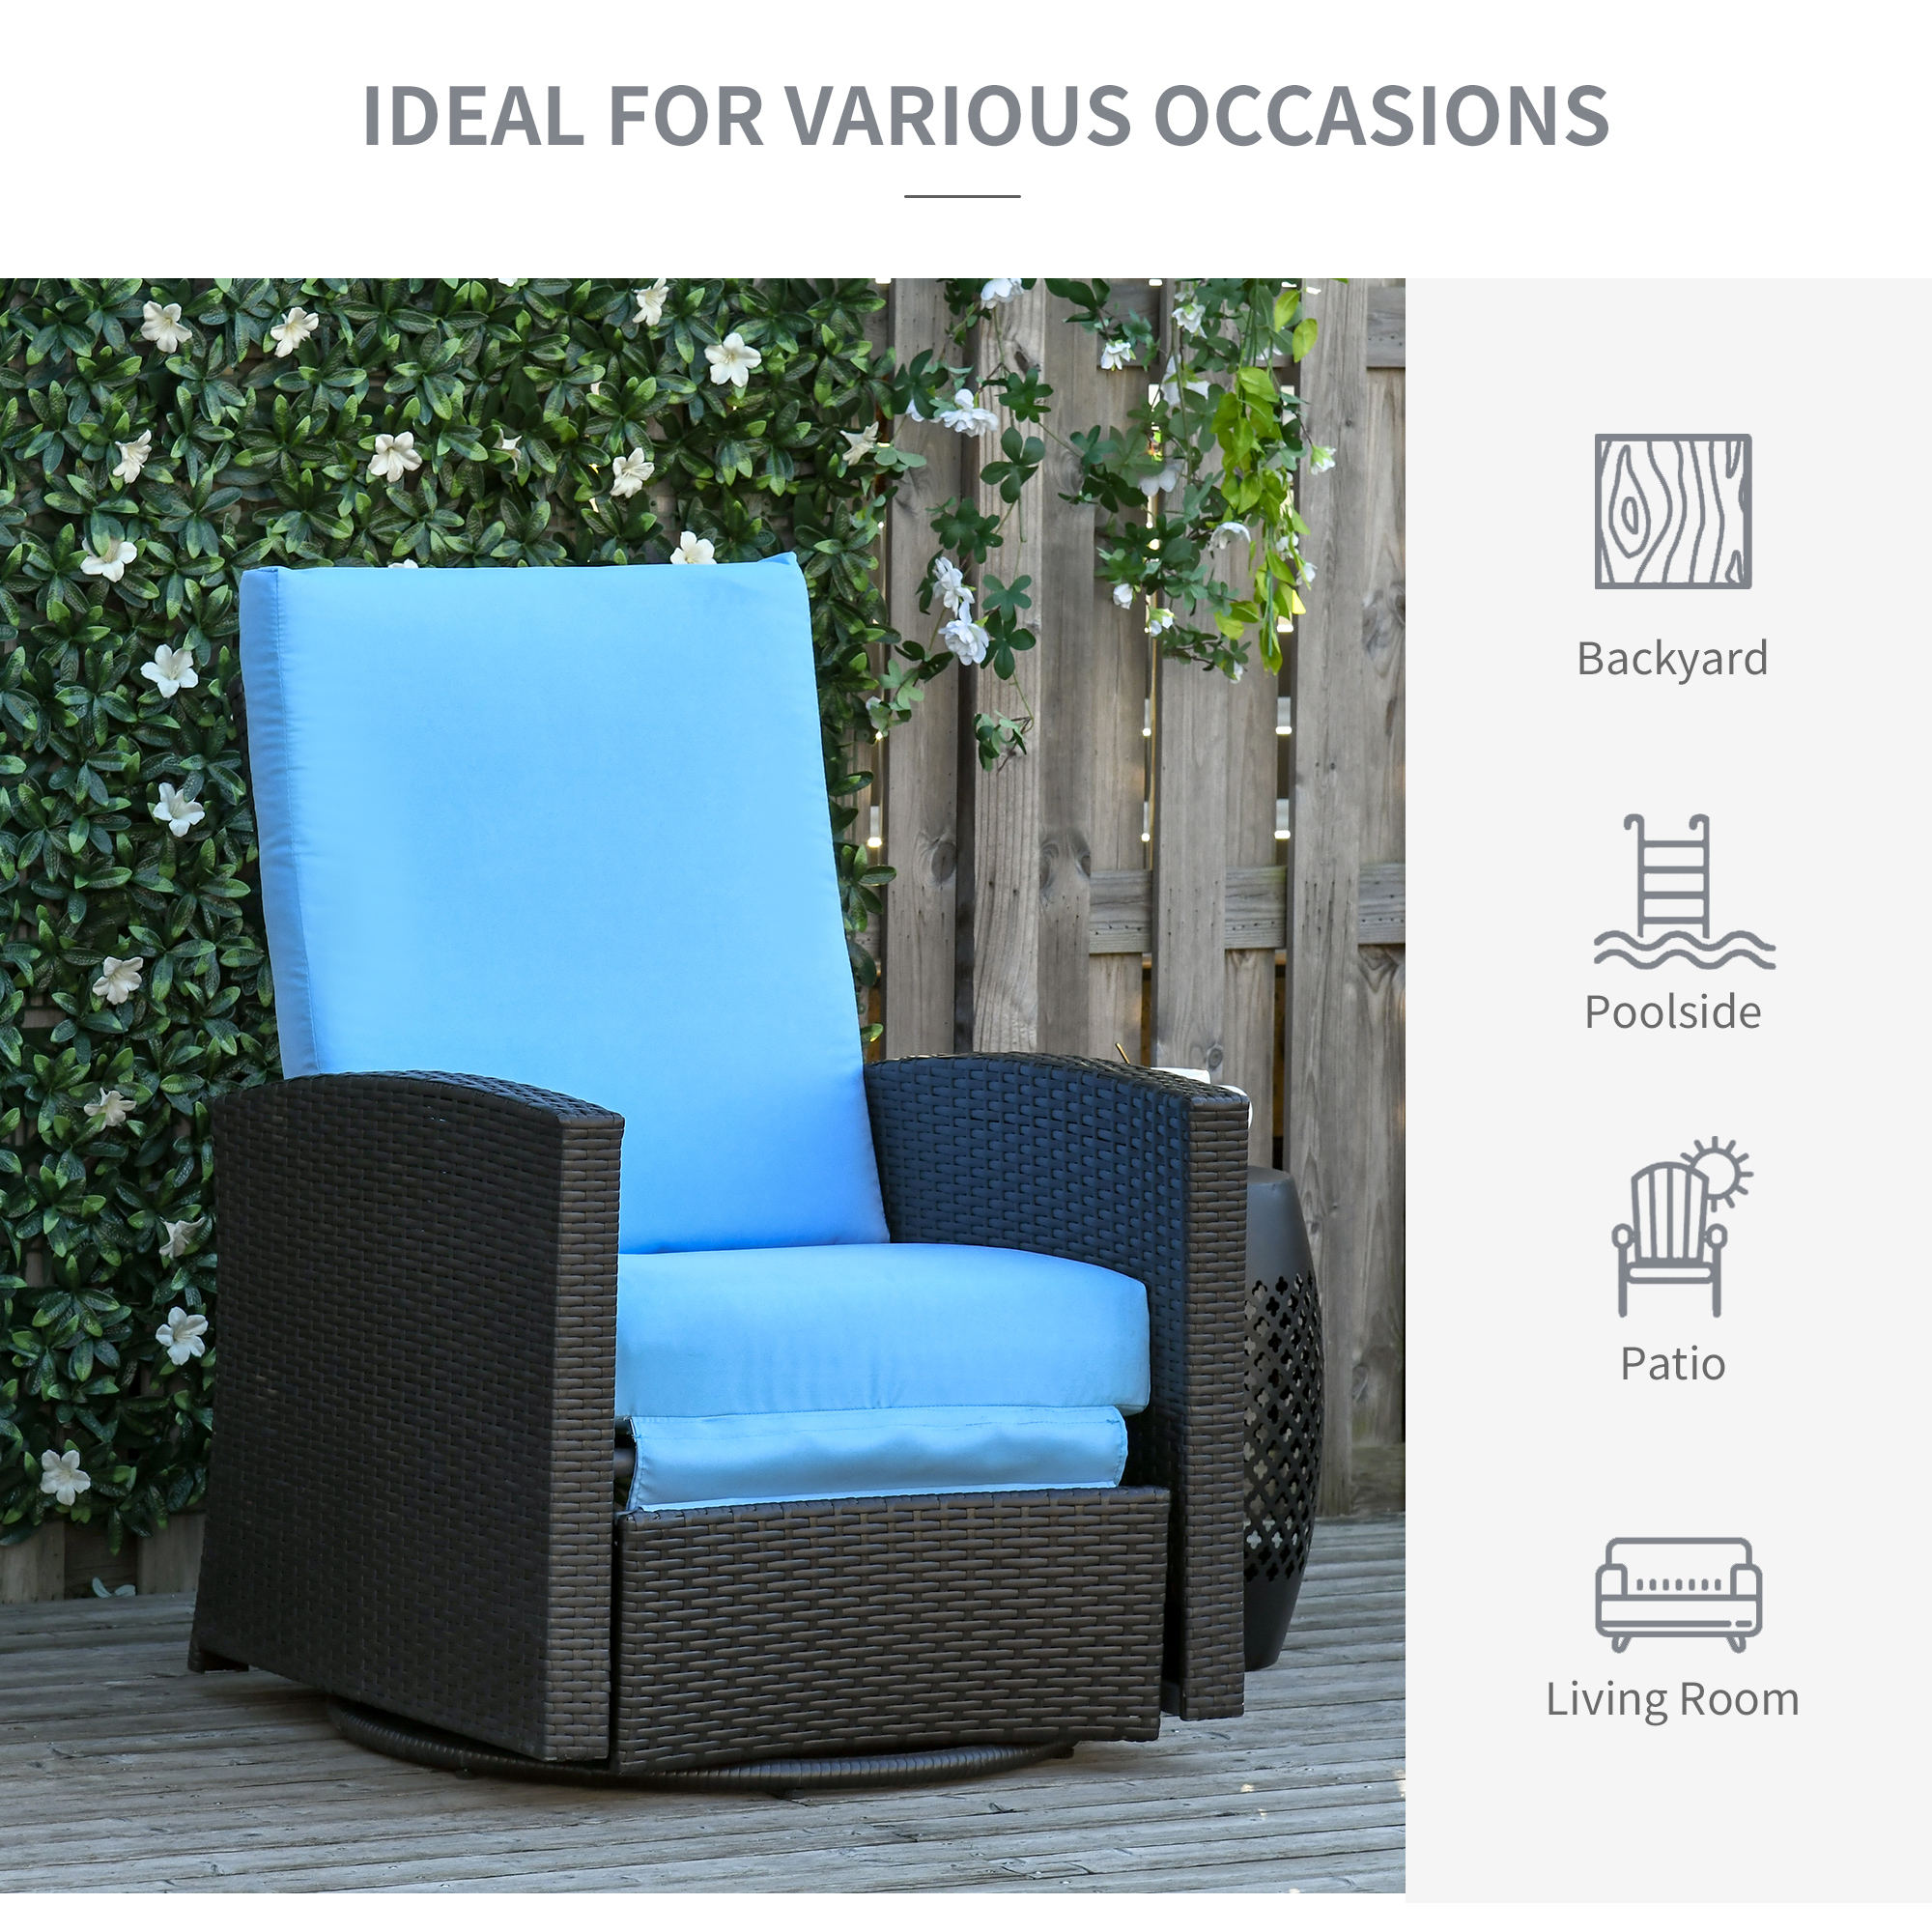 Outsunny Outdoor Wicker Swivel Recliner Chair, Reclining Backrest, Lifting Footrest, 360Â° Rotating Basic, Water Resistant Cushions for Patio, Light Blue - image 5 of 9